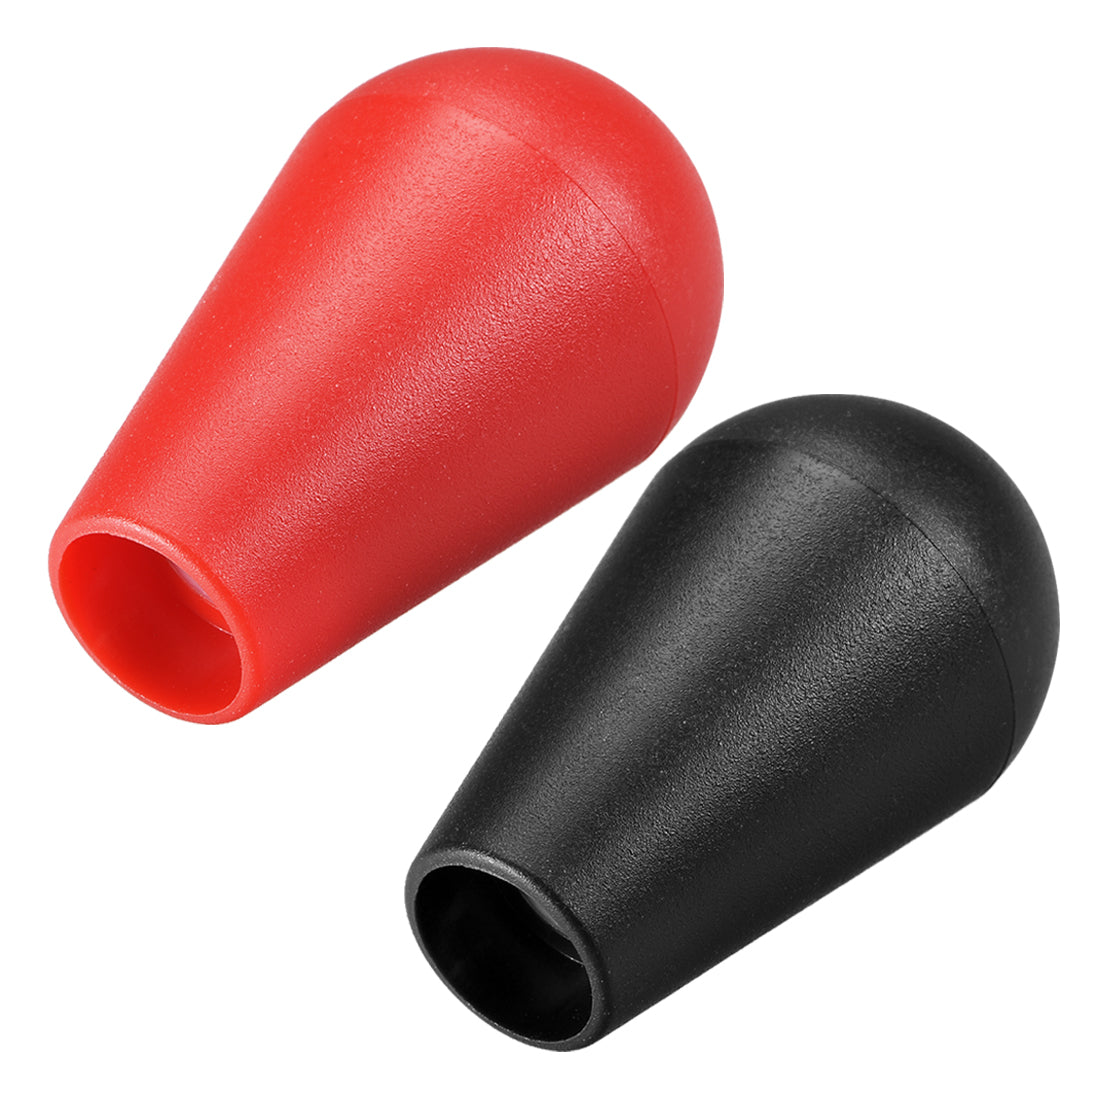 uxcell Uxcell Ellipse Oval Joystick Head Rocker Ball Top Handle American Type Arcade Game DIY Parts Replacement Red Black 2Pcs